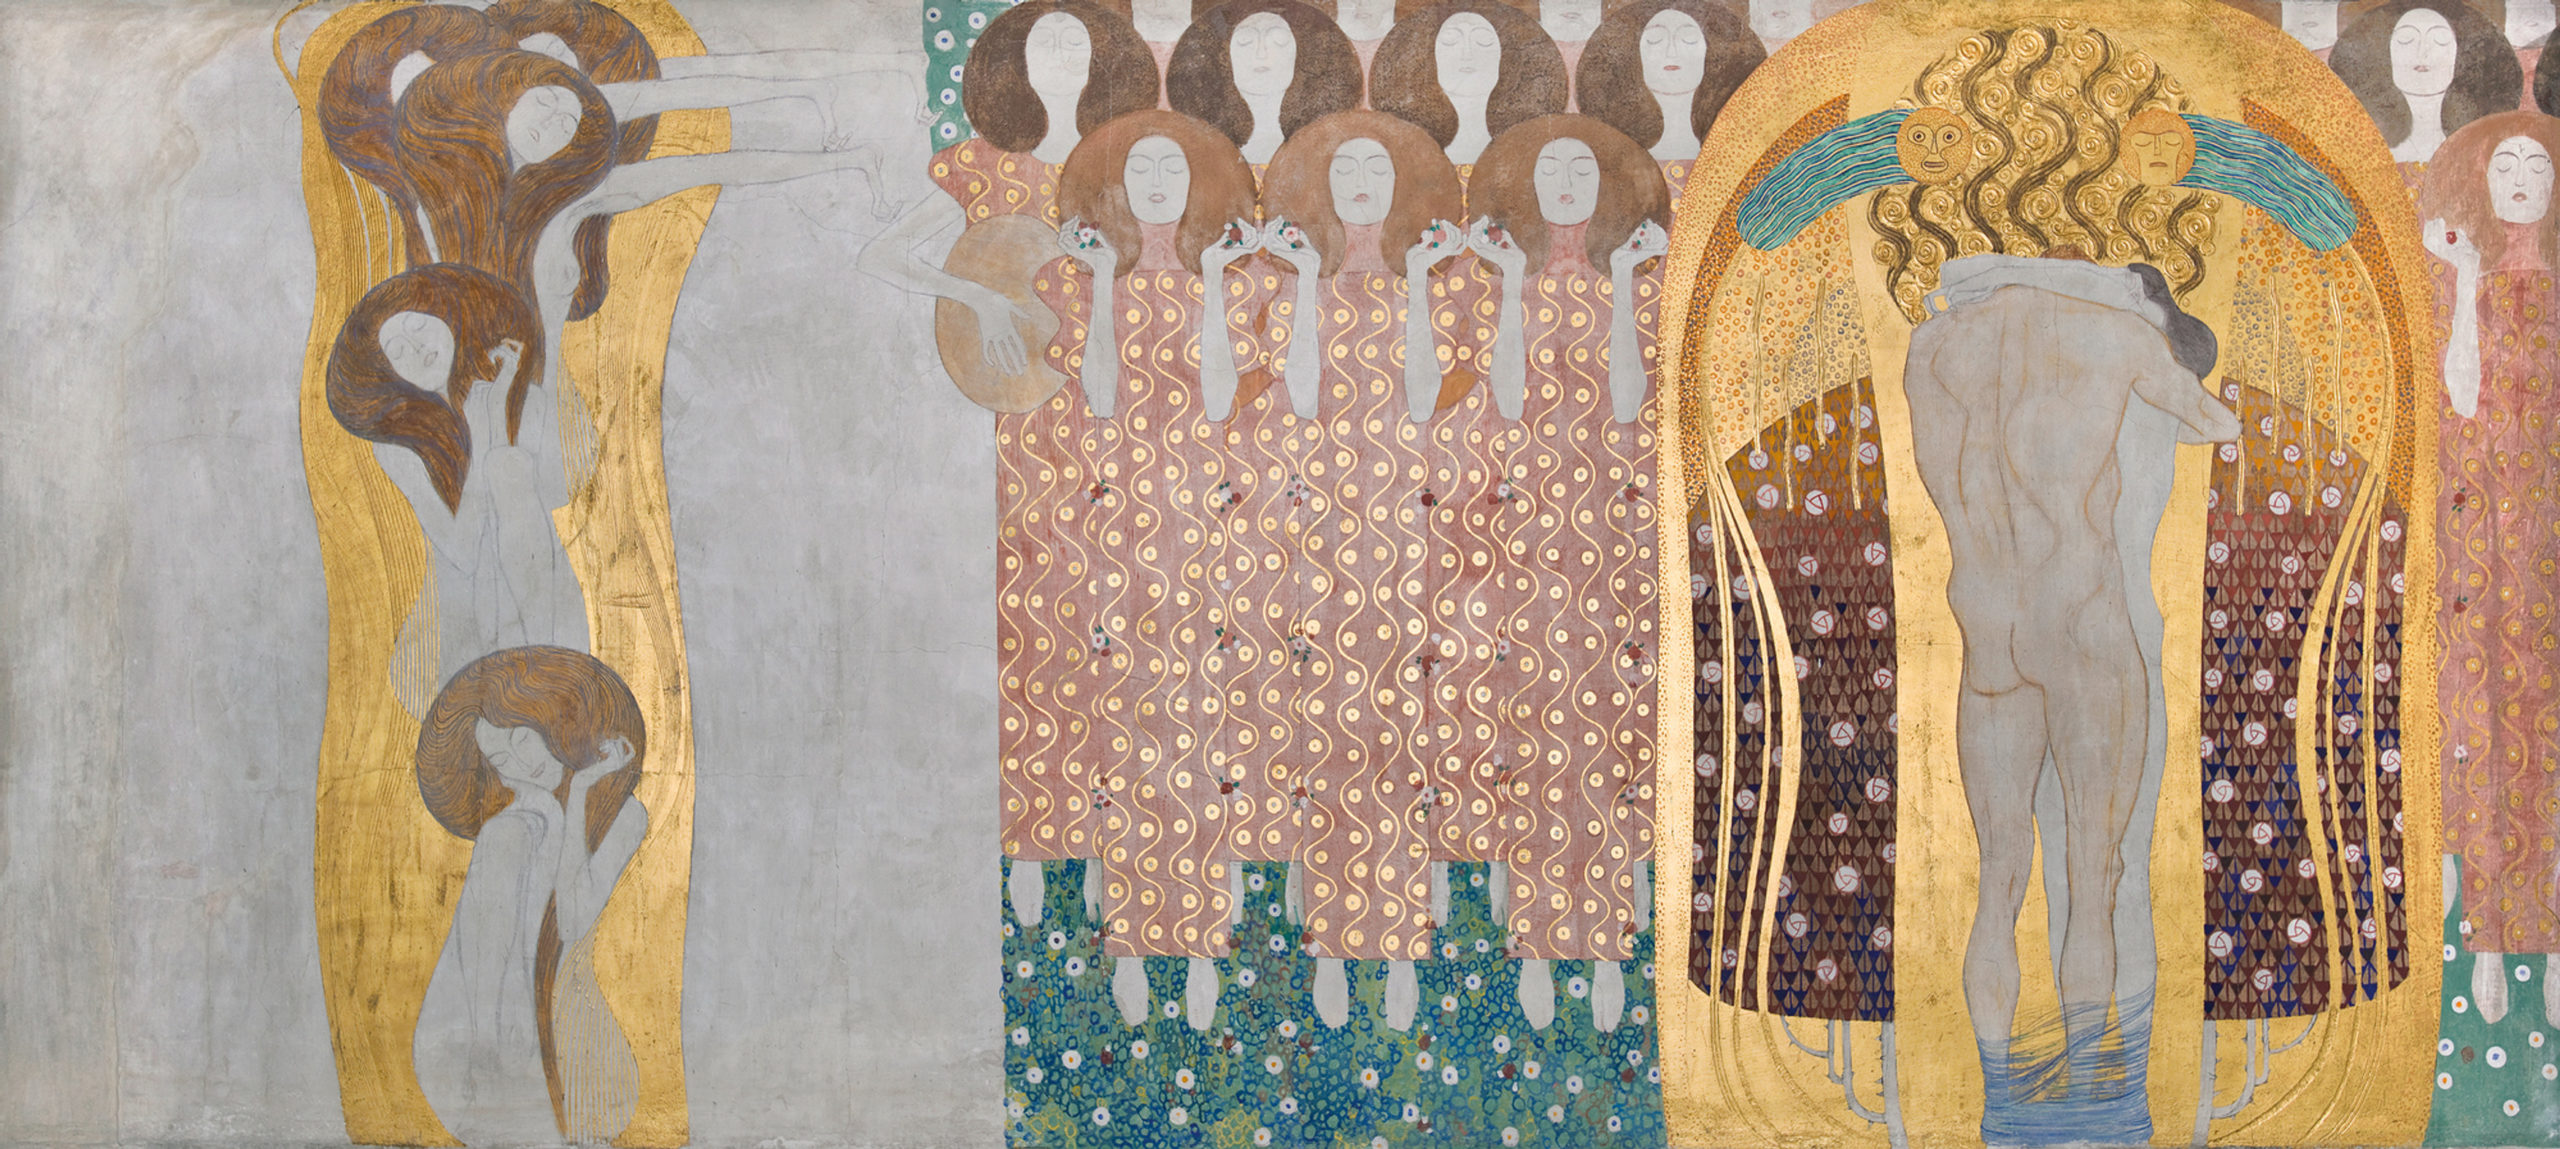 Gustav Klimt, Beethoven Frieze detail “Ode to joy”, 1901, casein, color, gold leaf, semi-precious stone, mother-of-pearl, plaster, charcoal and pencil on lime plaster, 215 x 481 cm, Secession Building, Vienna